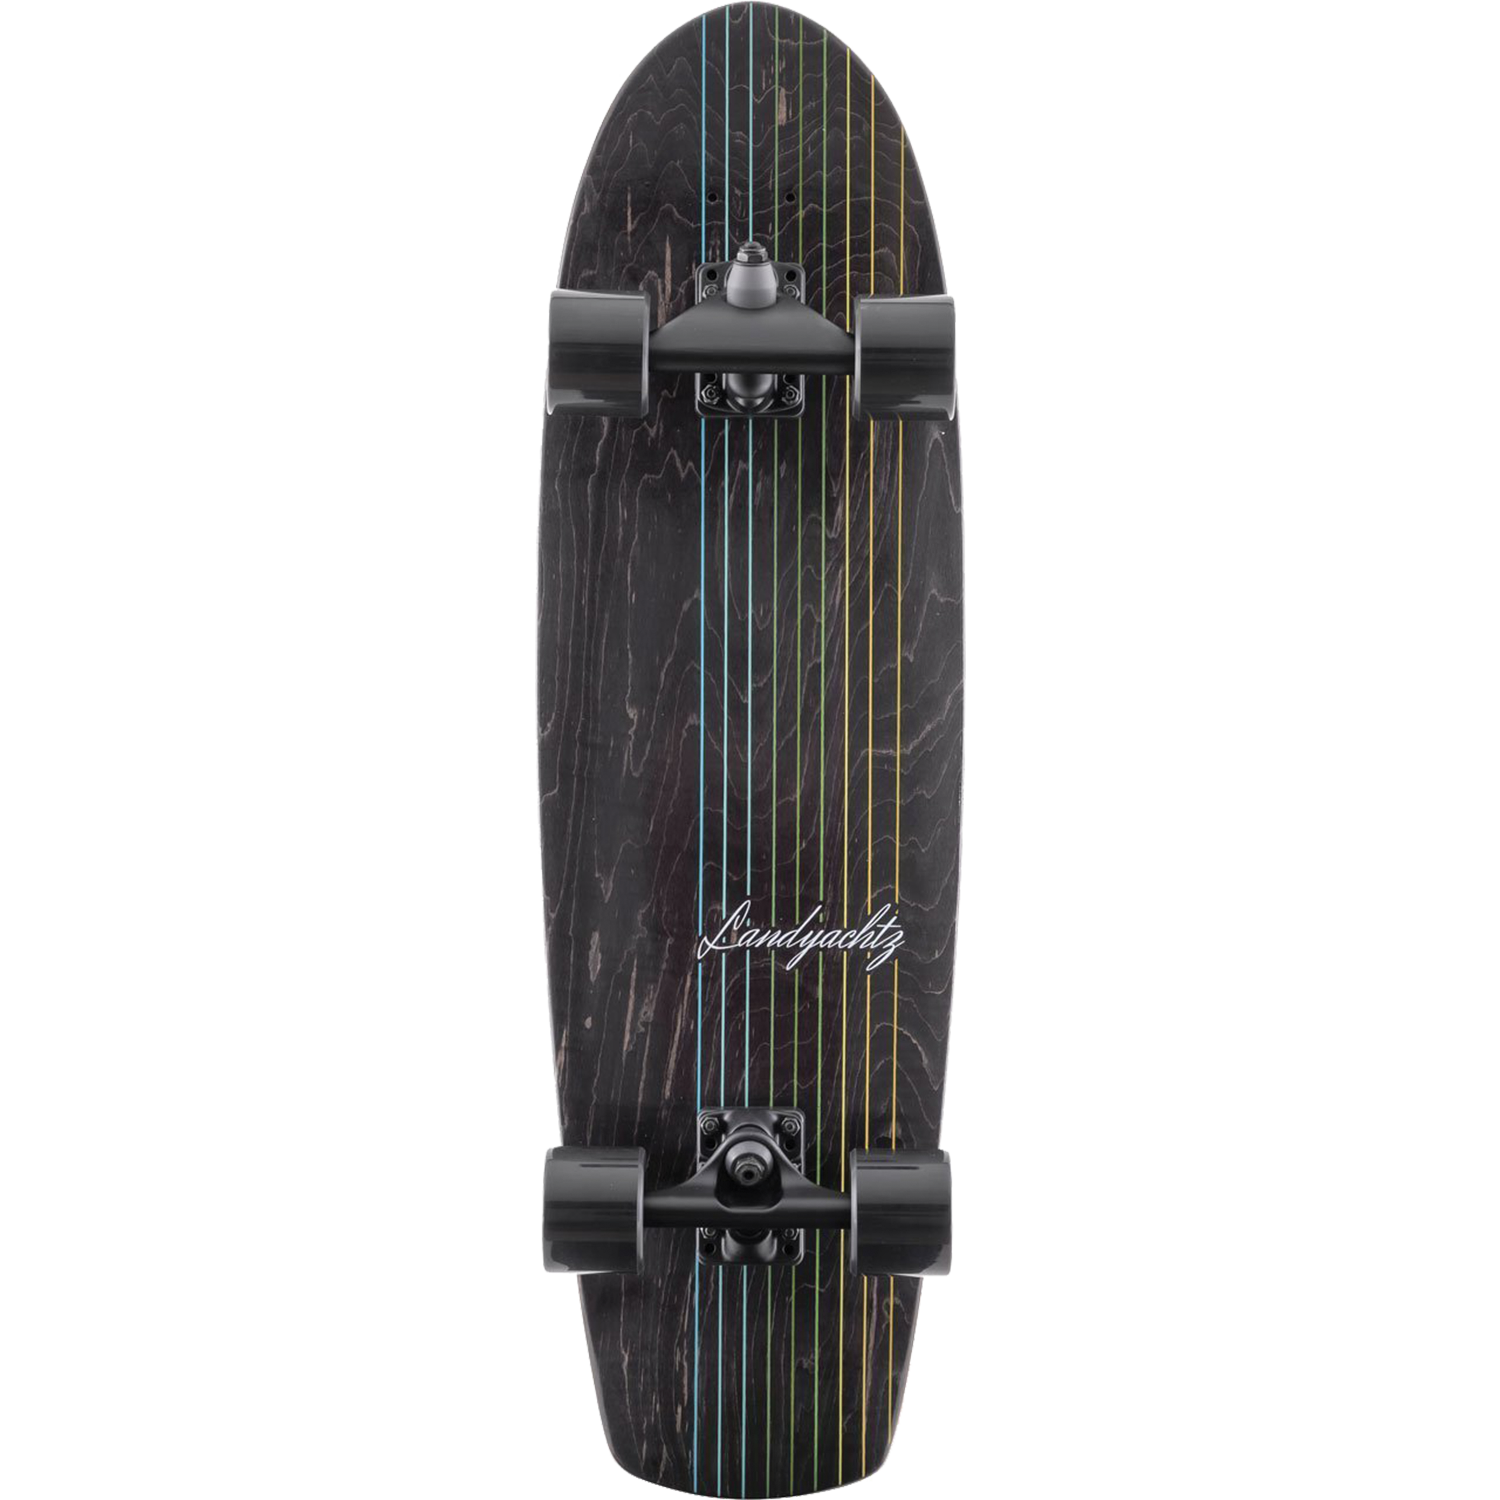 Landyachtz Complete Skateboards 2021 - Ready To Ride out of the Box!